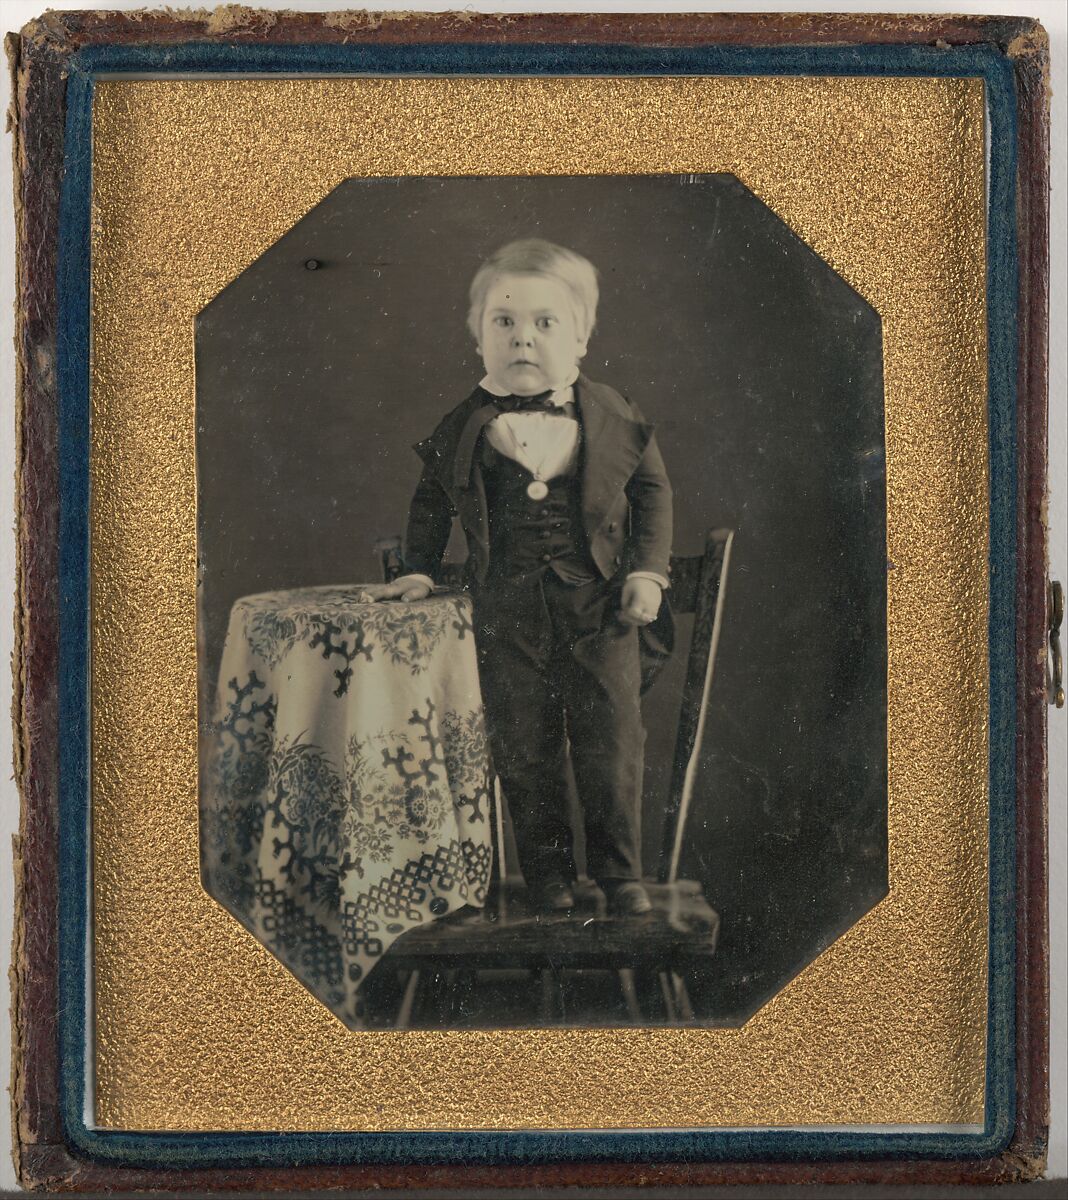 Tom Thumb (Charles Sherwood Stratton), Unknown (American), Daguerreotype 